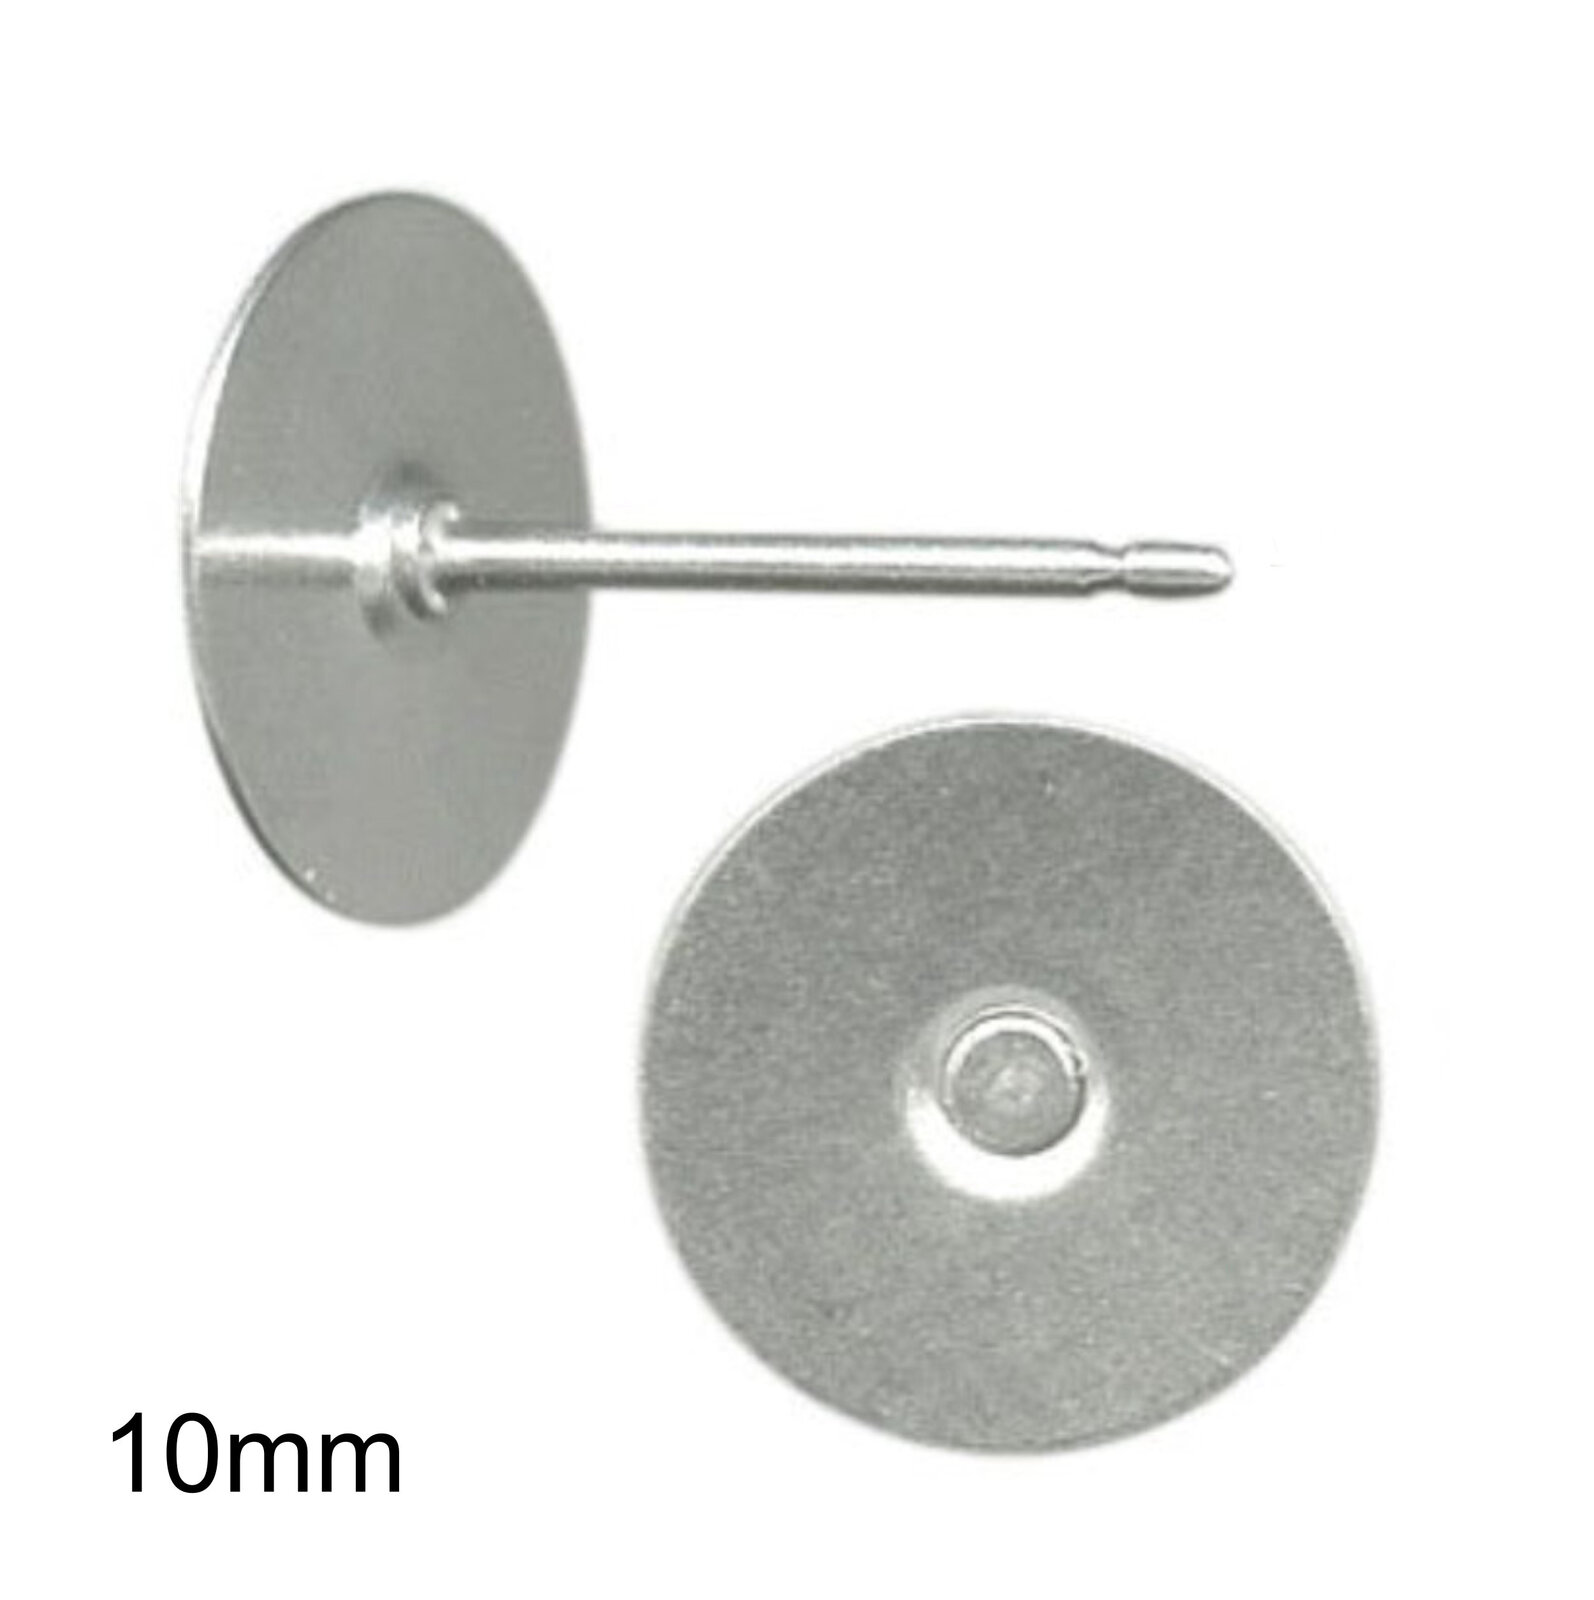 Standard Post Hypoal 10mm Pad USA Stainless Steel Studs with Clutch Variations 